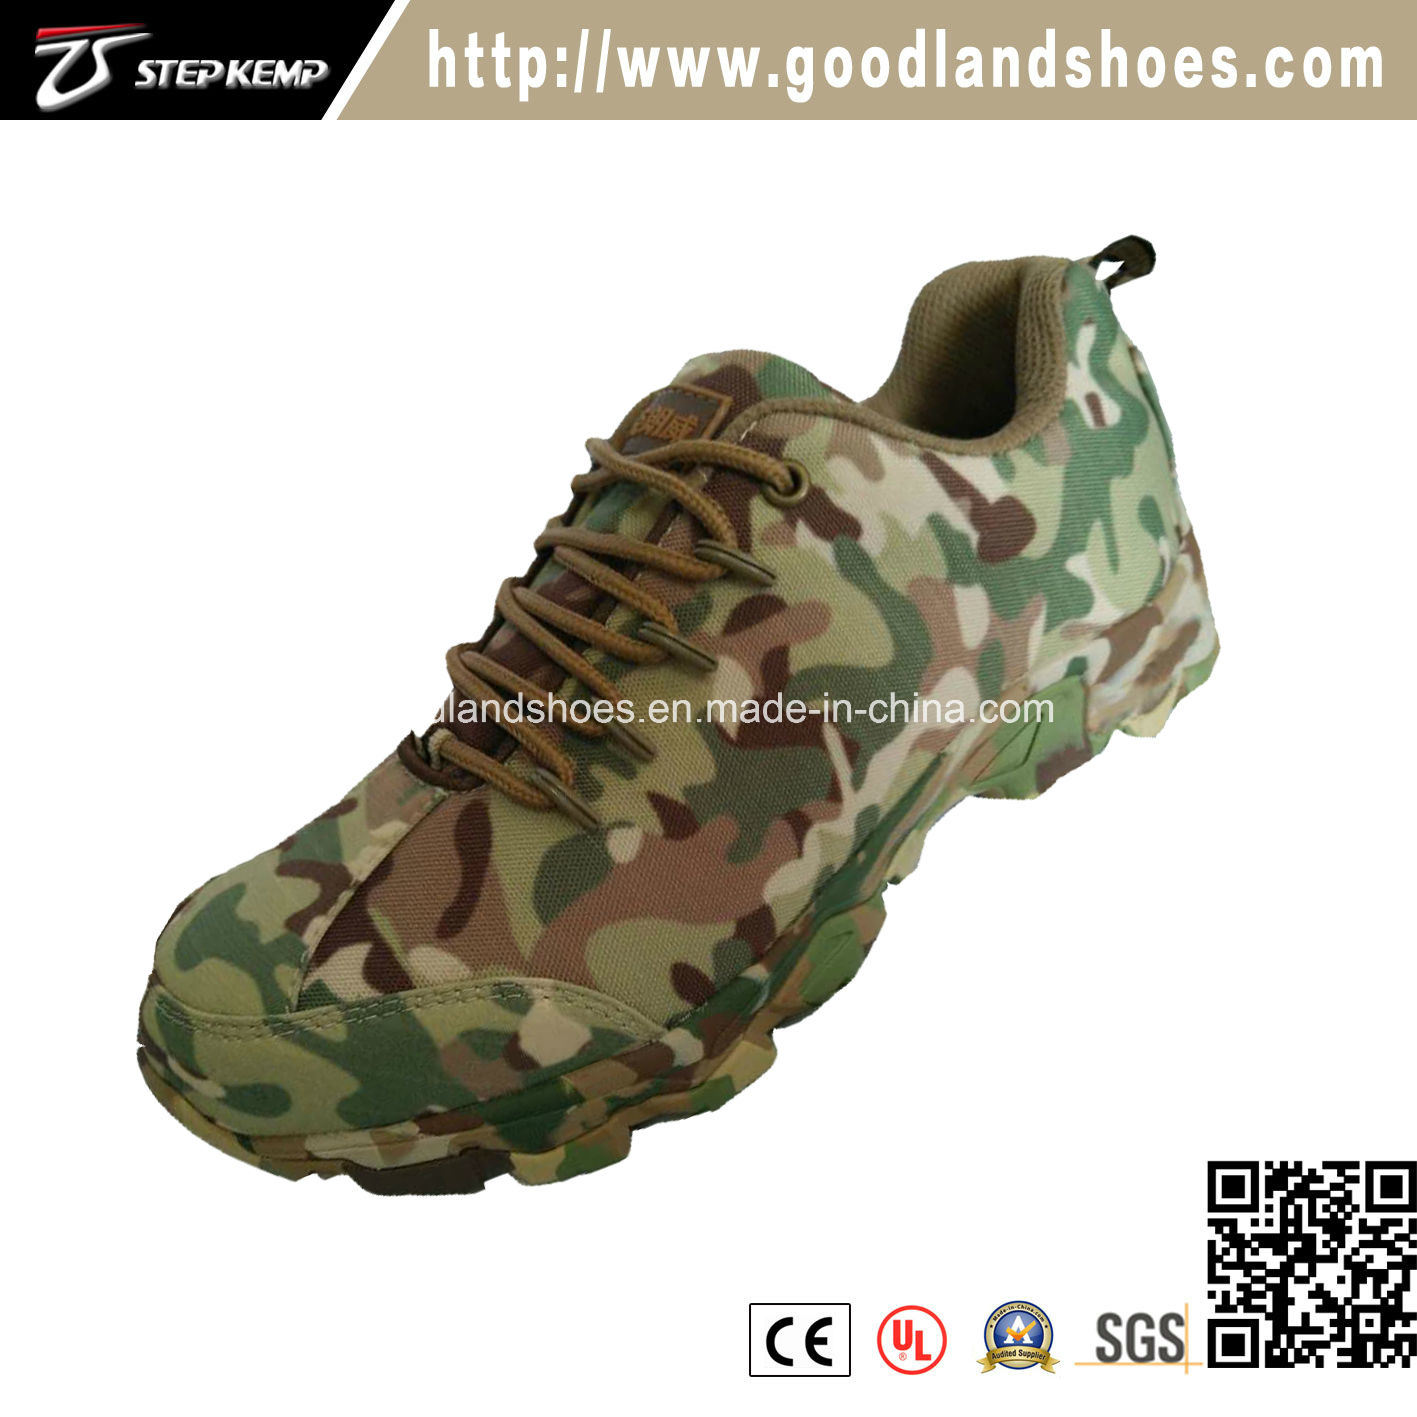 Camouflage Design Outdoor Casual Shoes Boots Army Shoes Men 20203